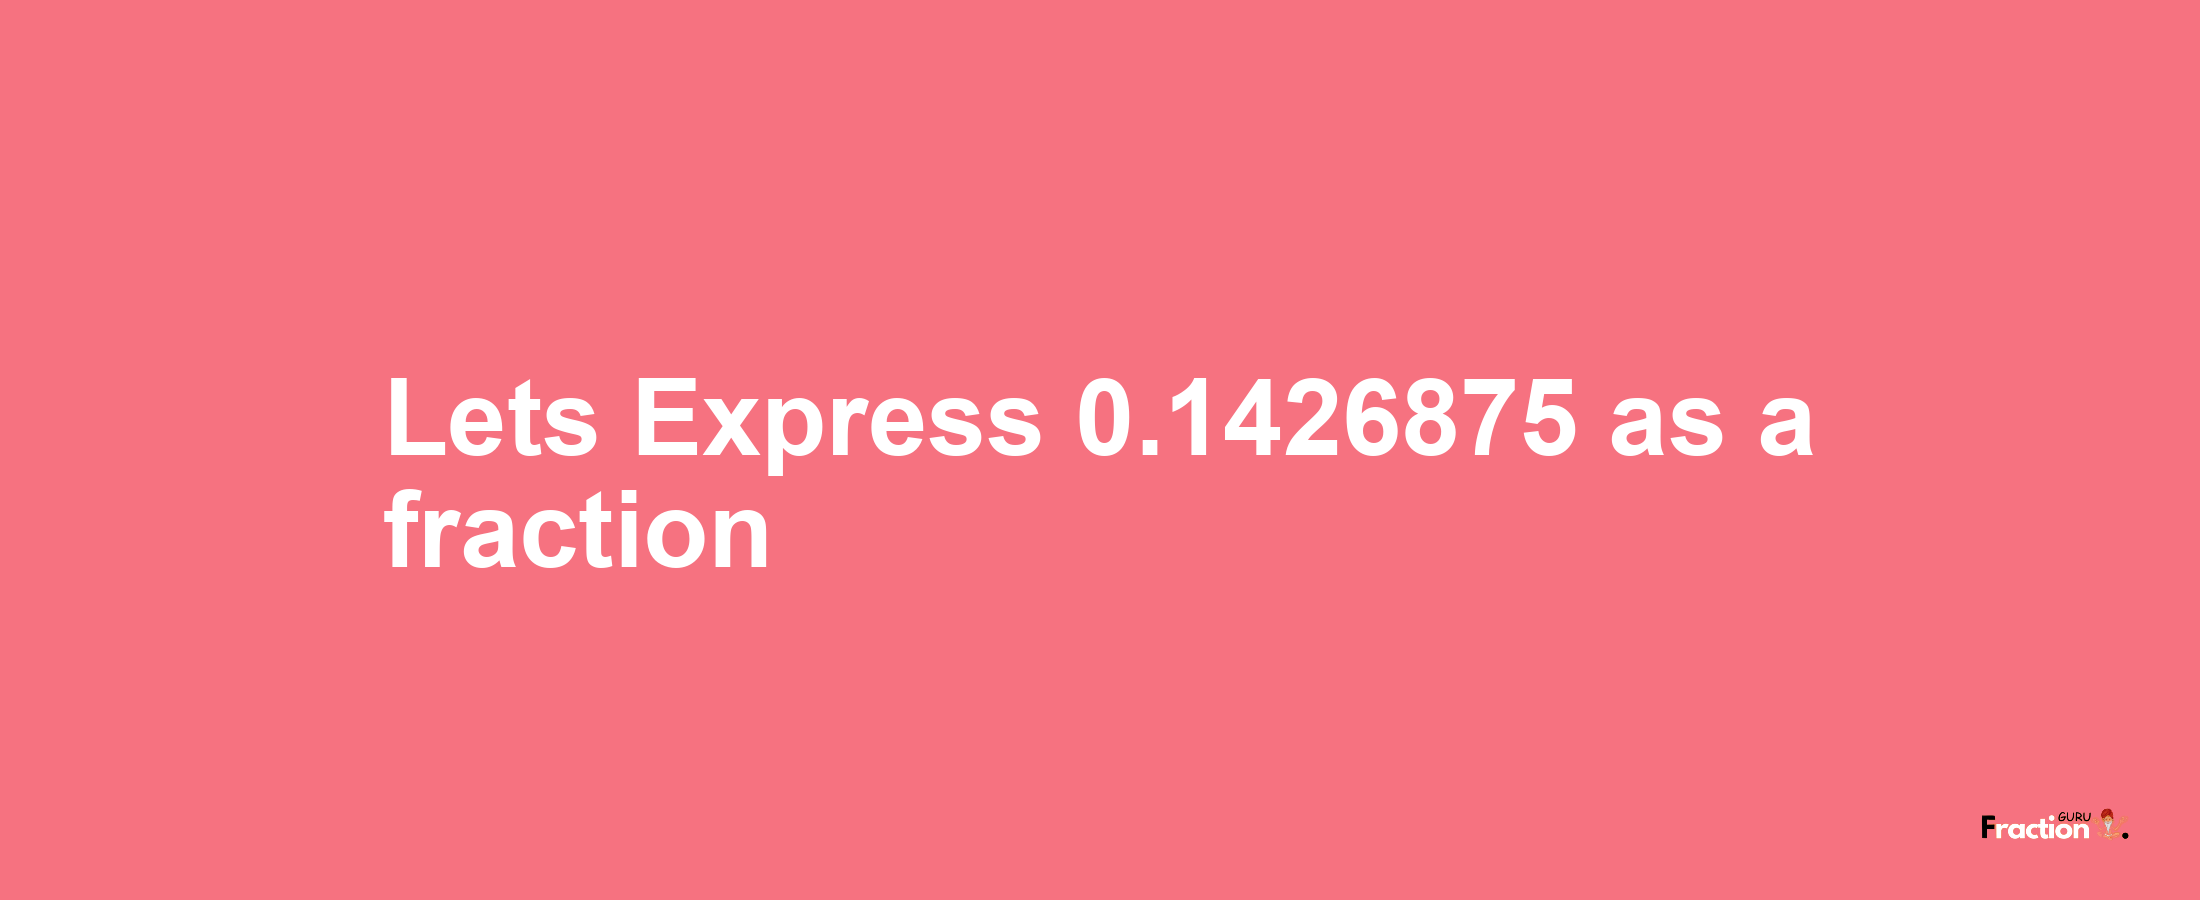 Lets Express 0.1426875 as afraction